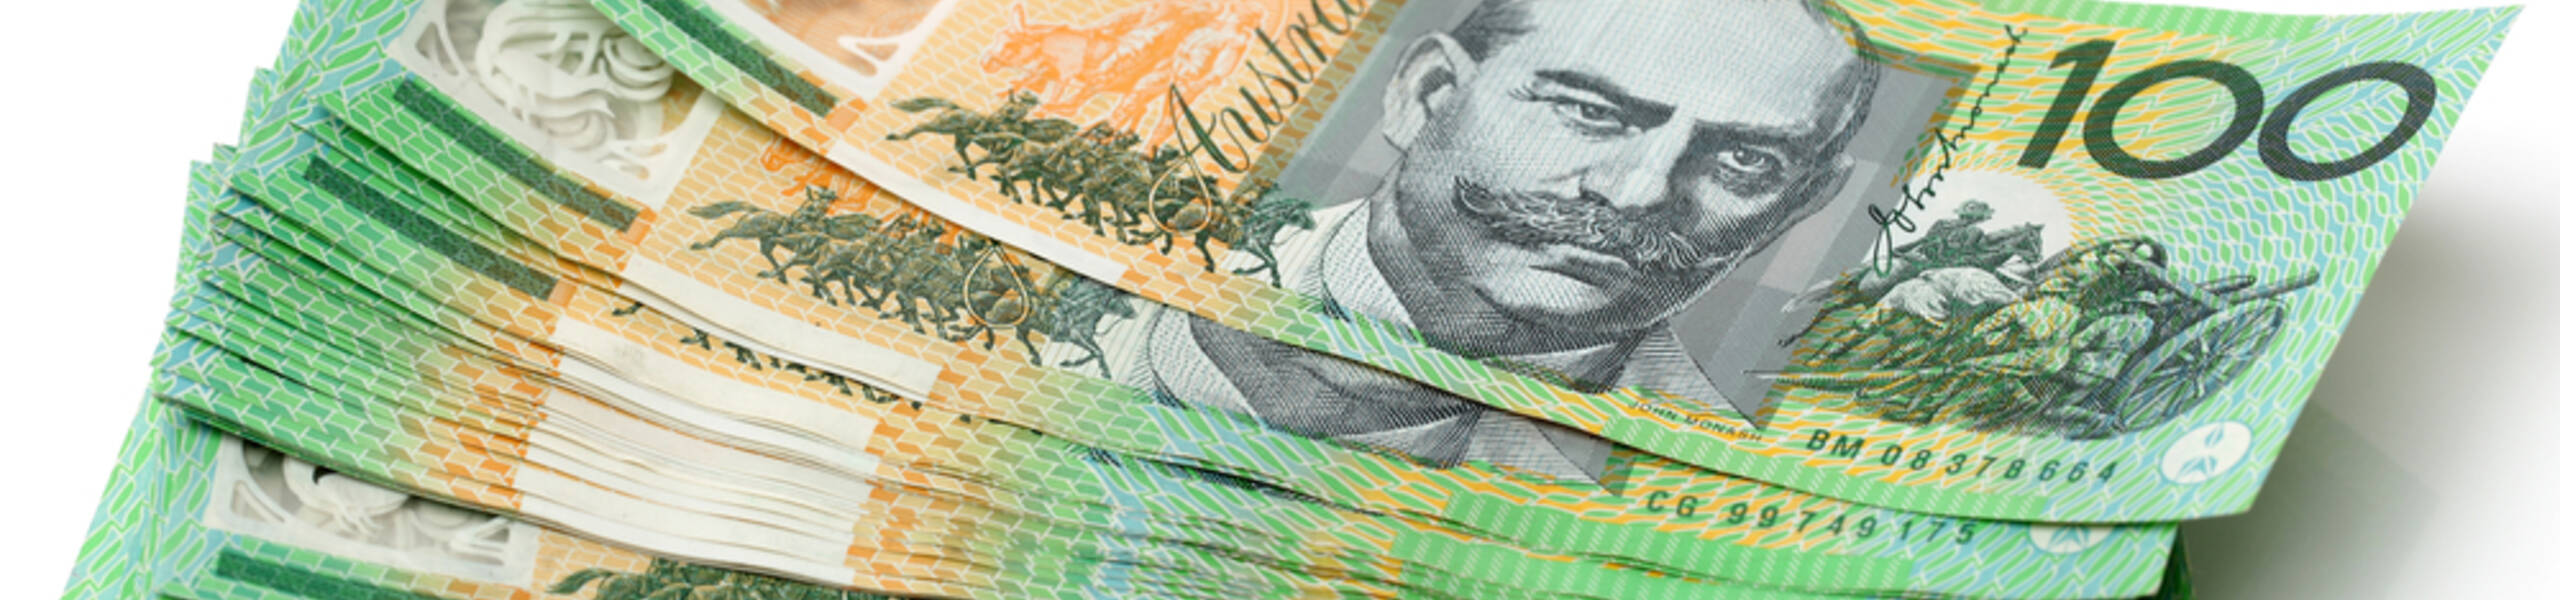 AUD/JPY ready for further downside pressure